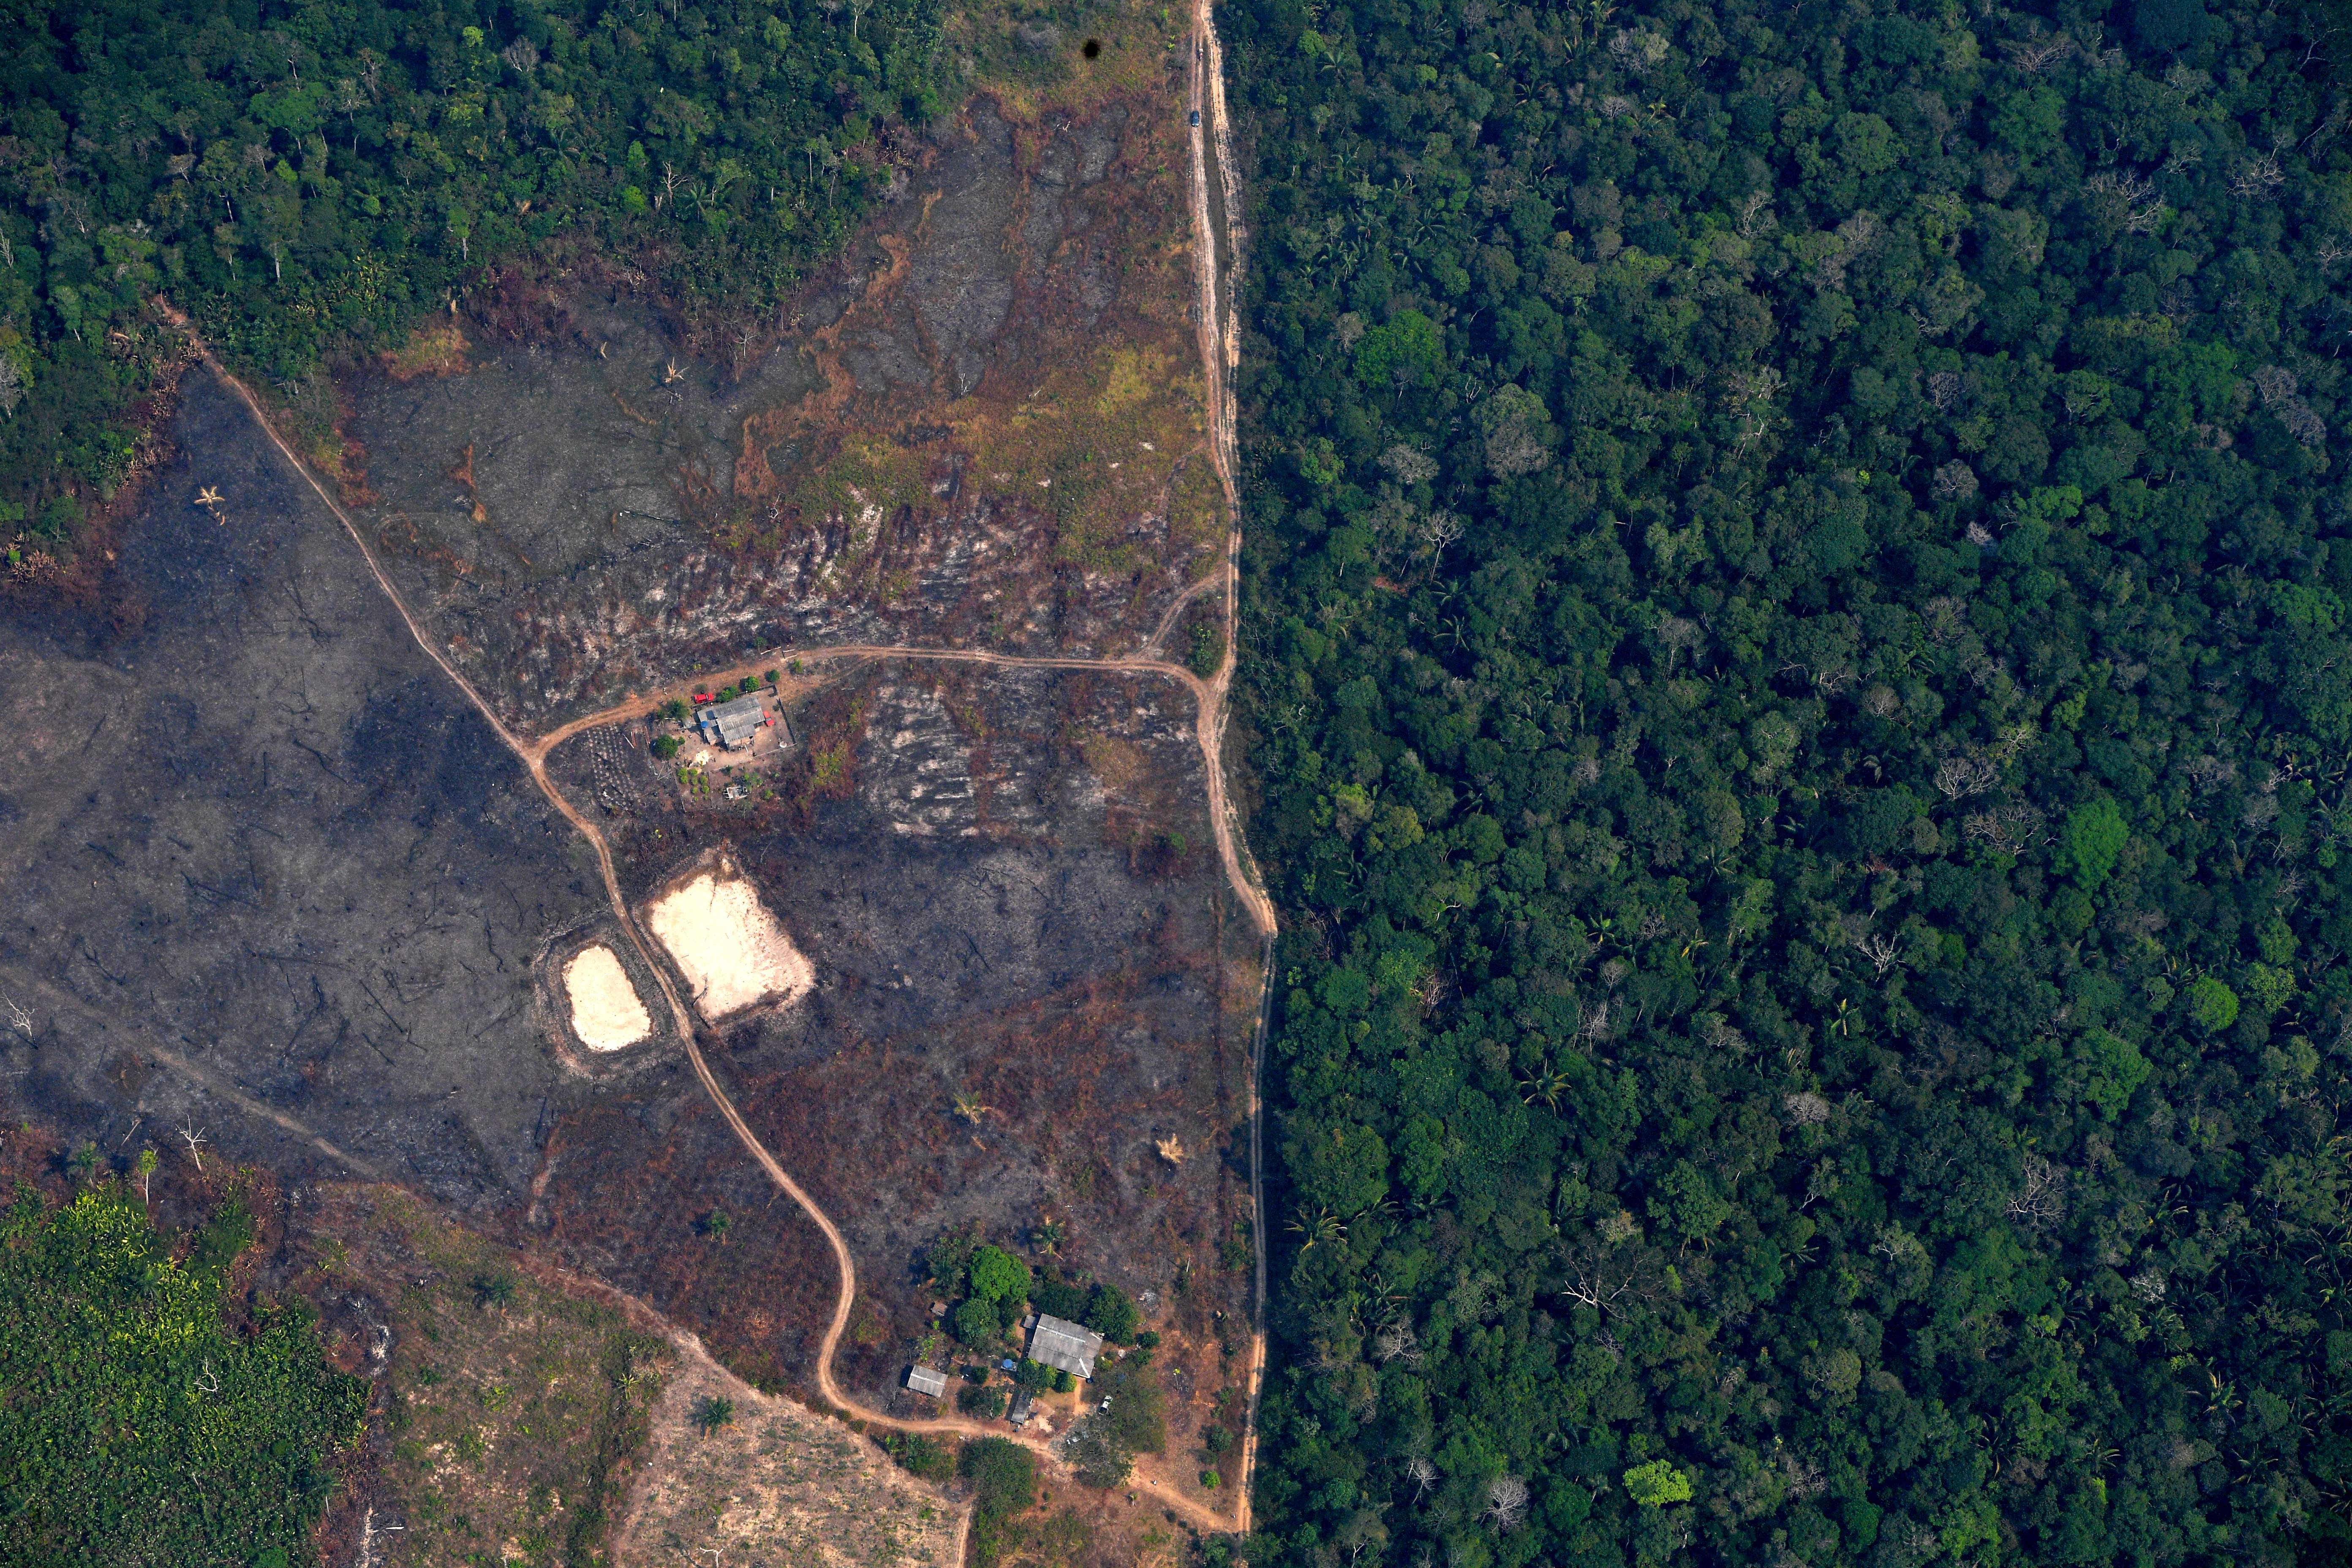 Aerial picture showing a deforested piece of land in the Amazon in Rondonia, northern Brazil